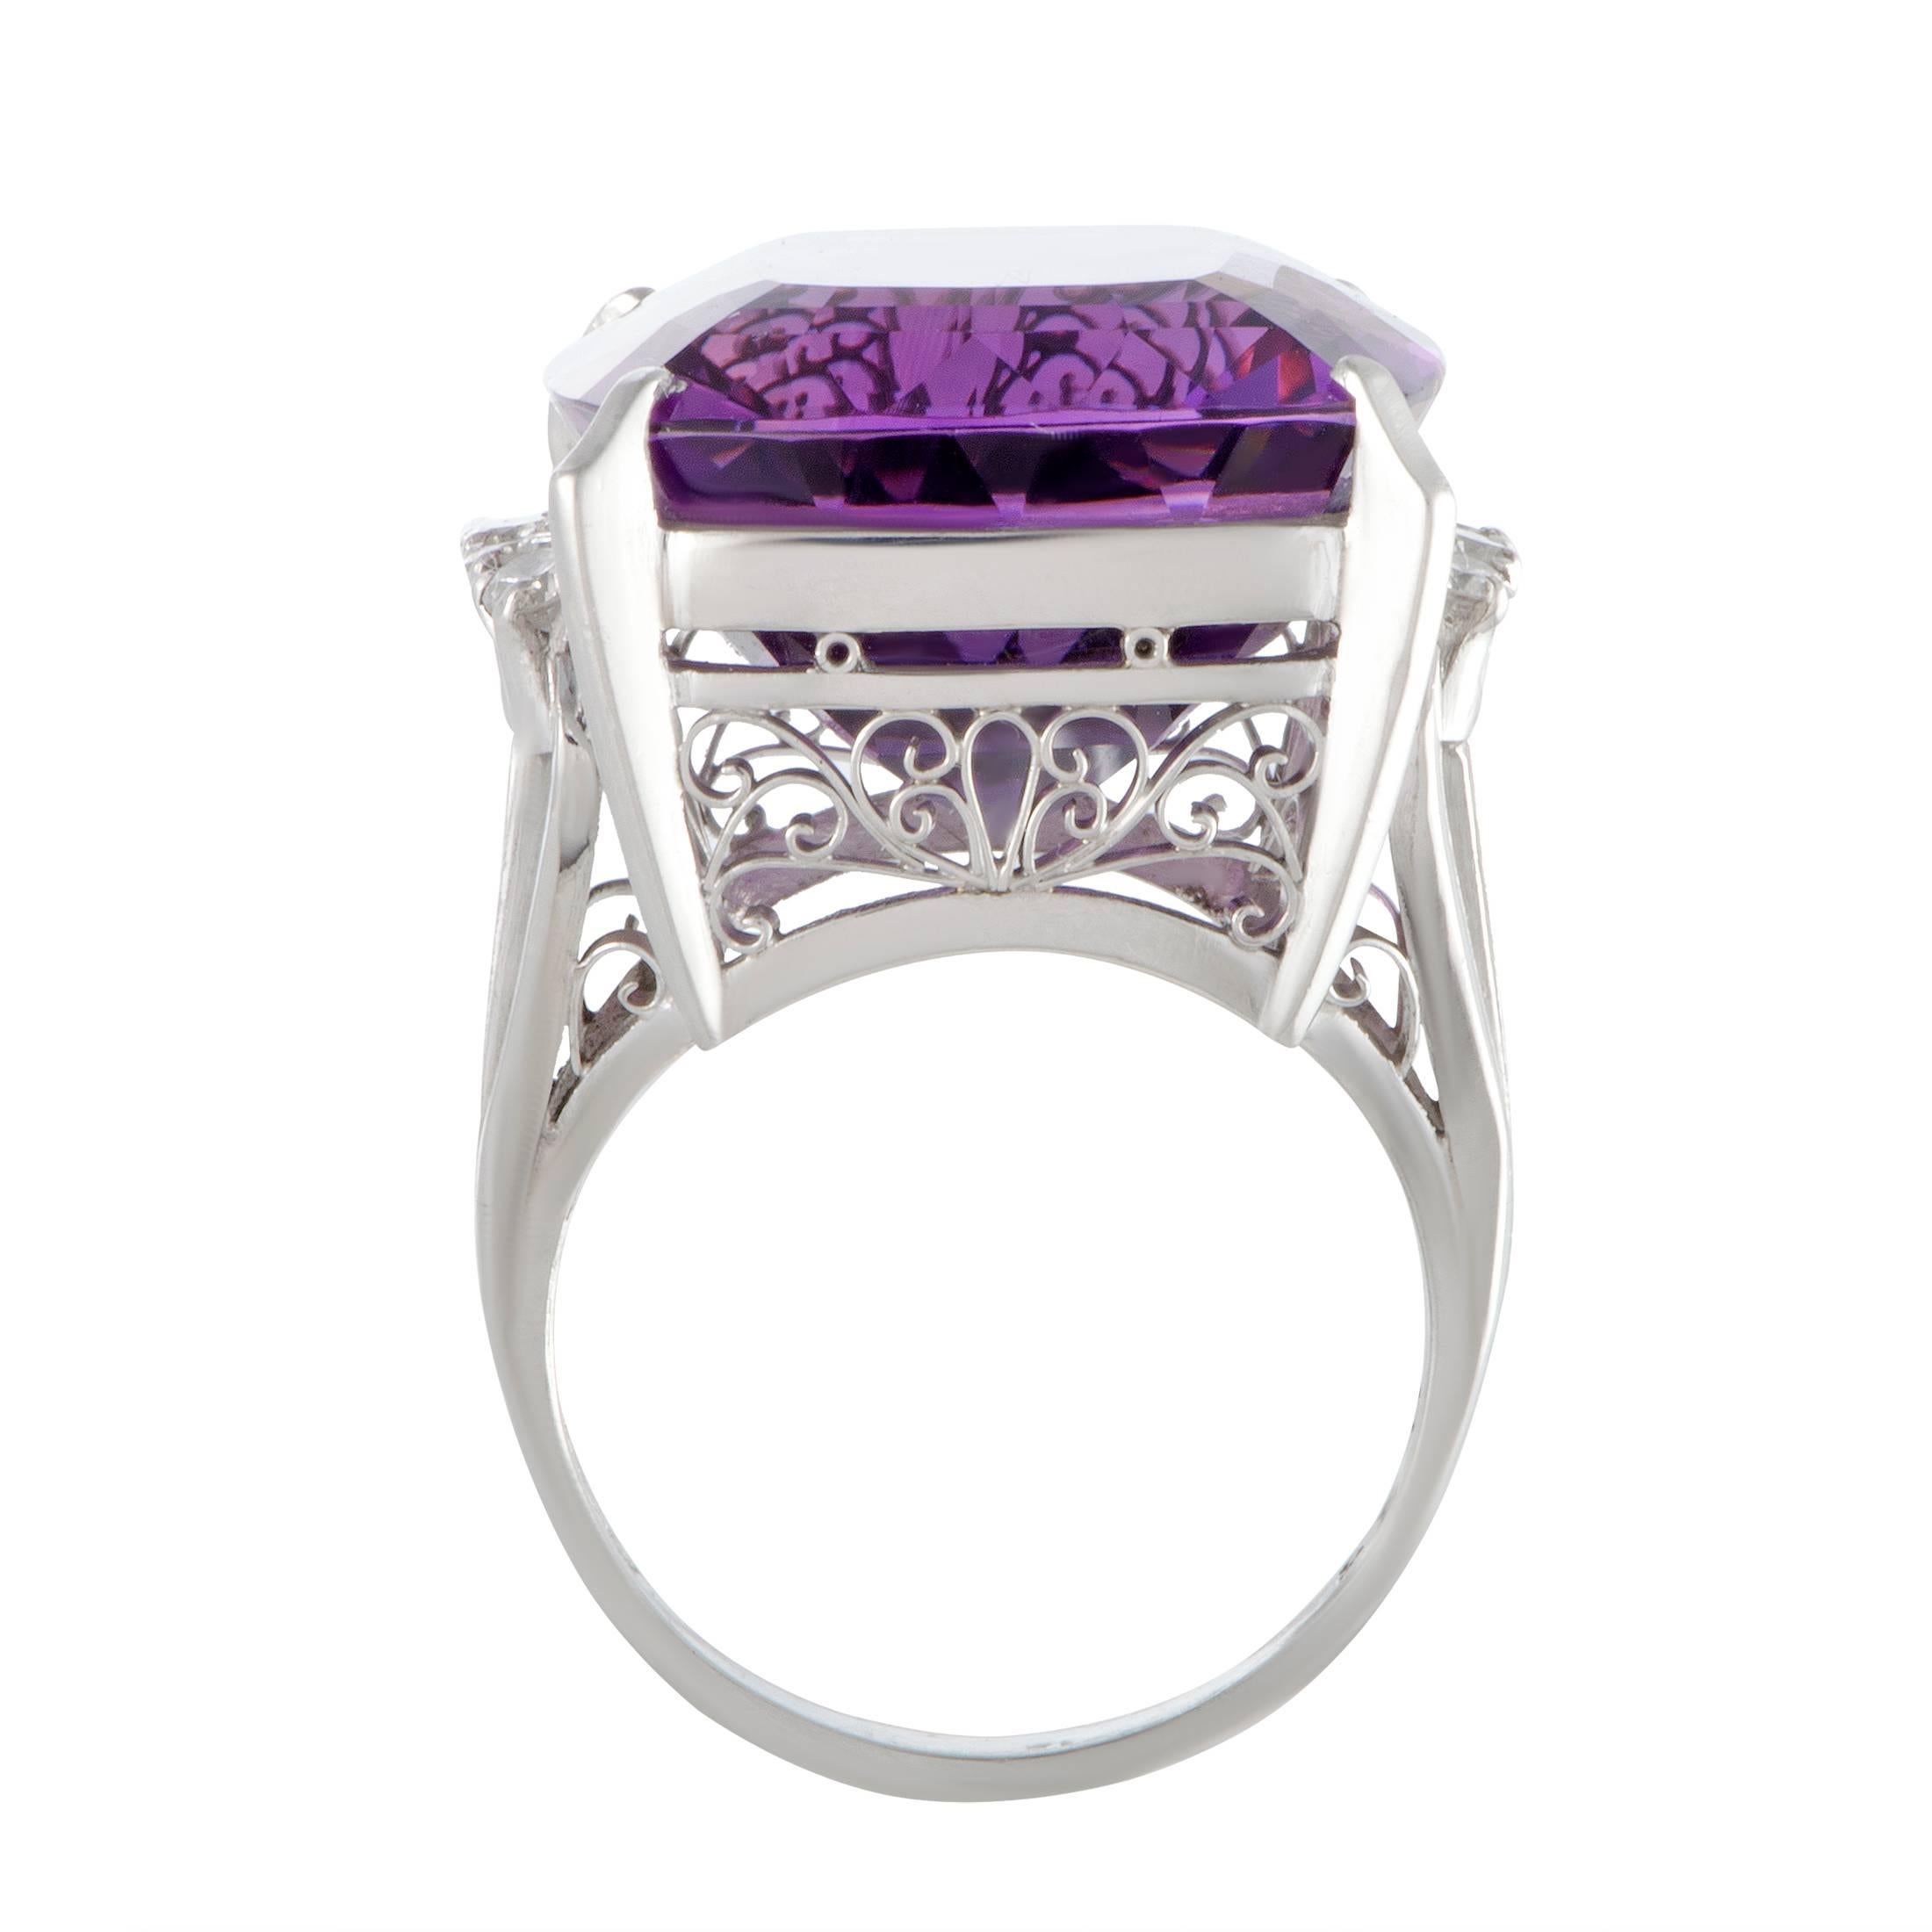 Masterfully crafted in a stunningly intricate manner and lavishly set with eye-catching gems, this fabulous ring features compelling design and luxurious décor. The ring is made of platinum and boasts a spellbinding amethyst and 0.35 carats of